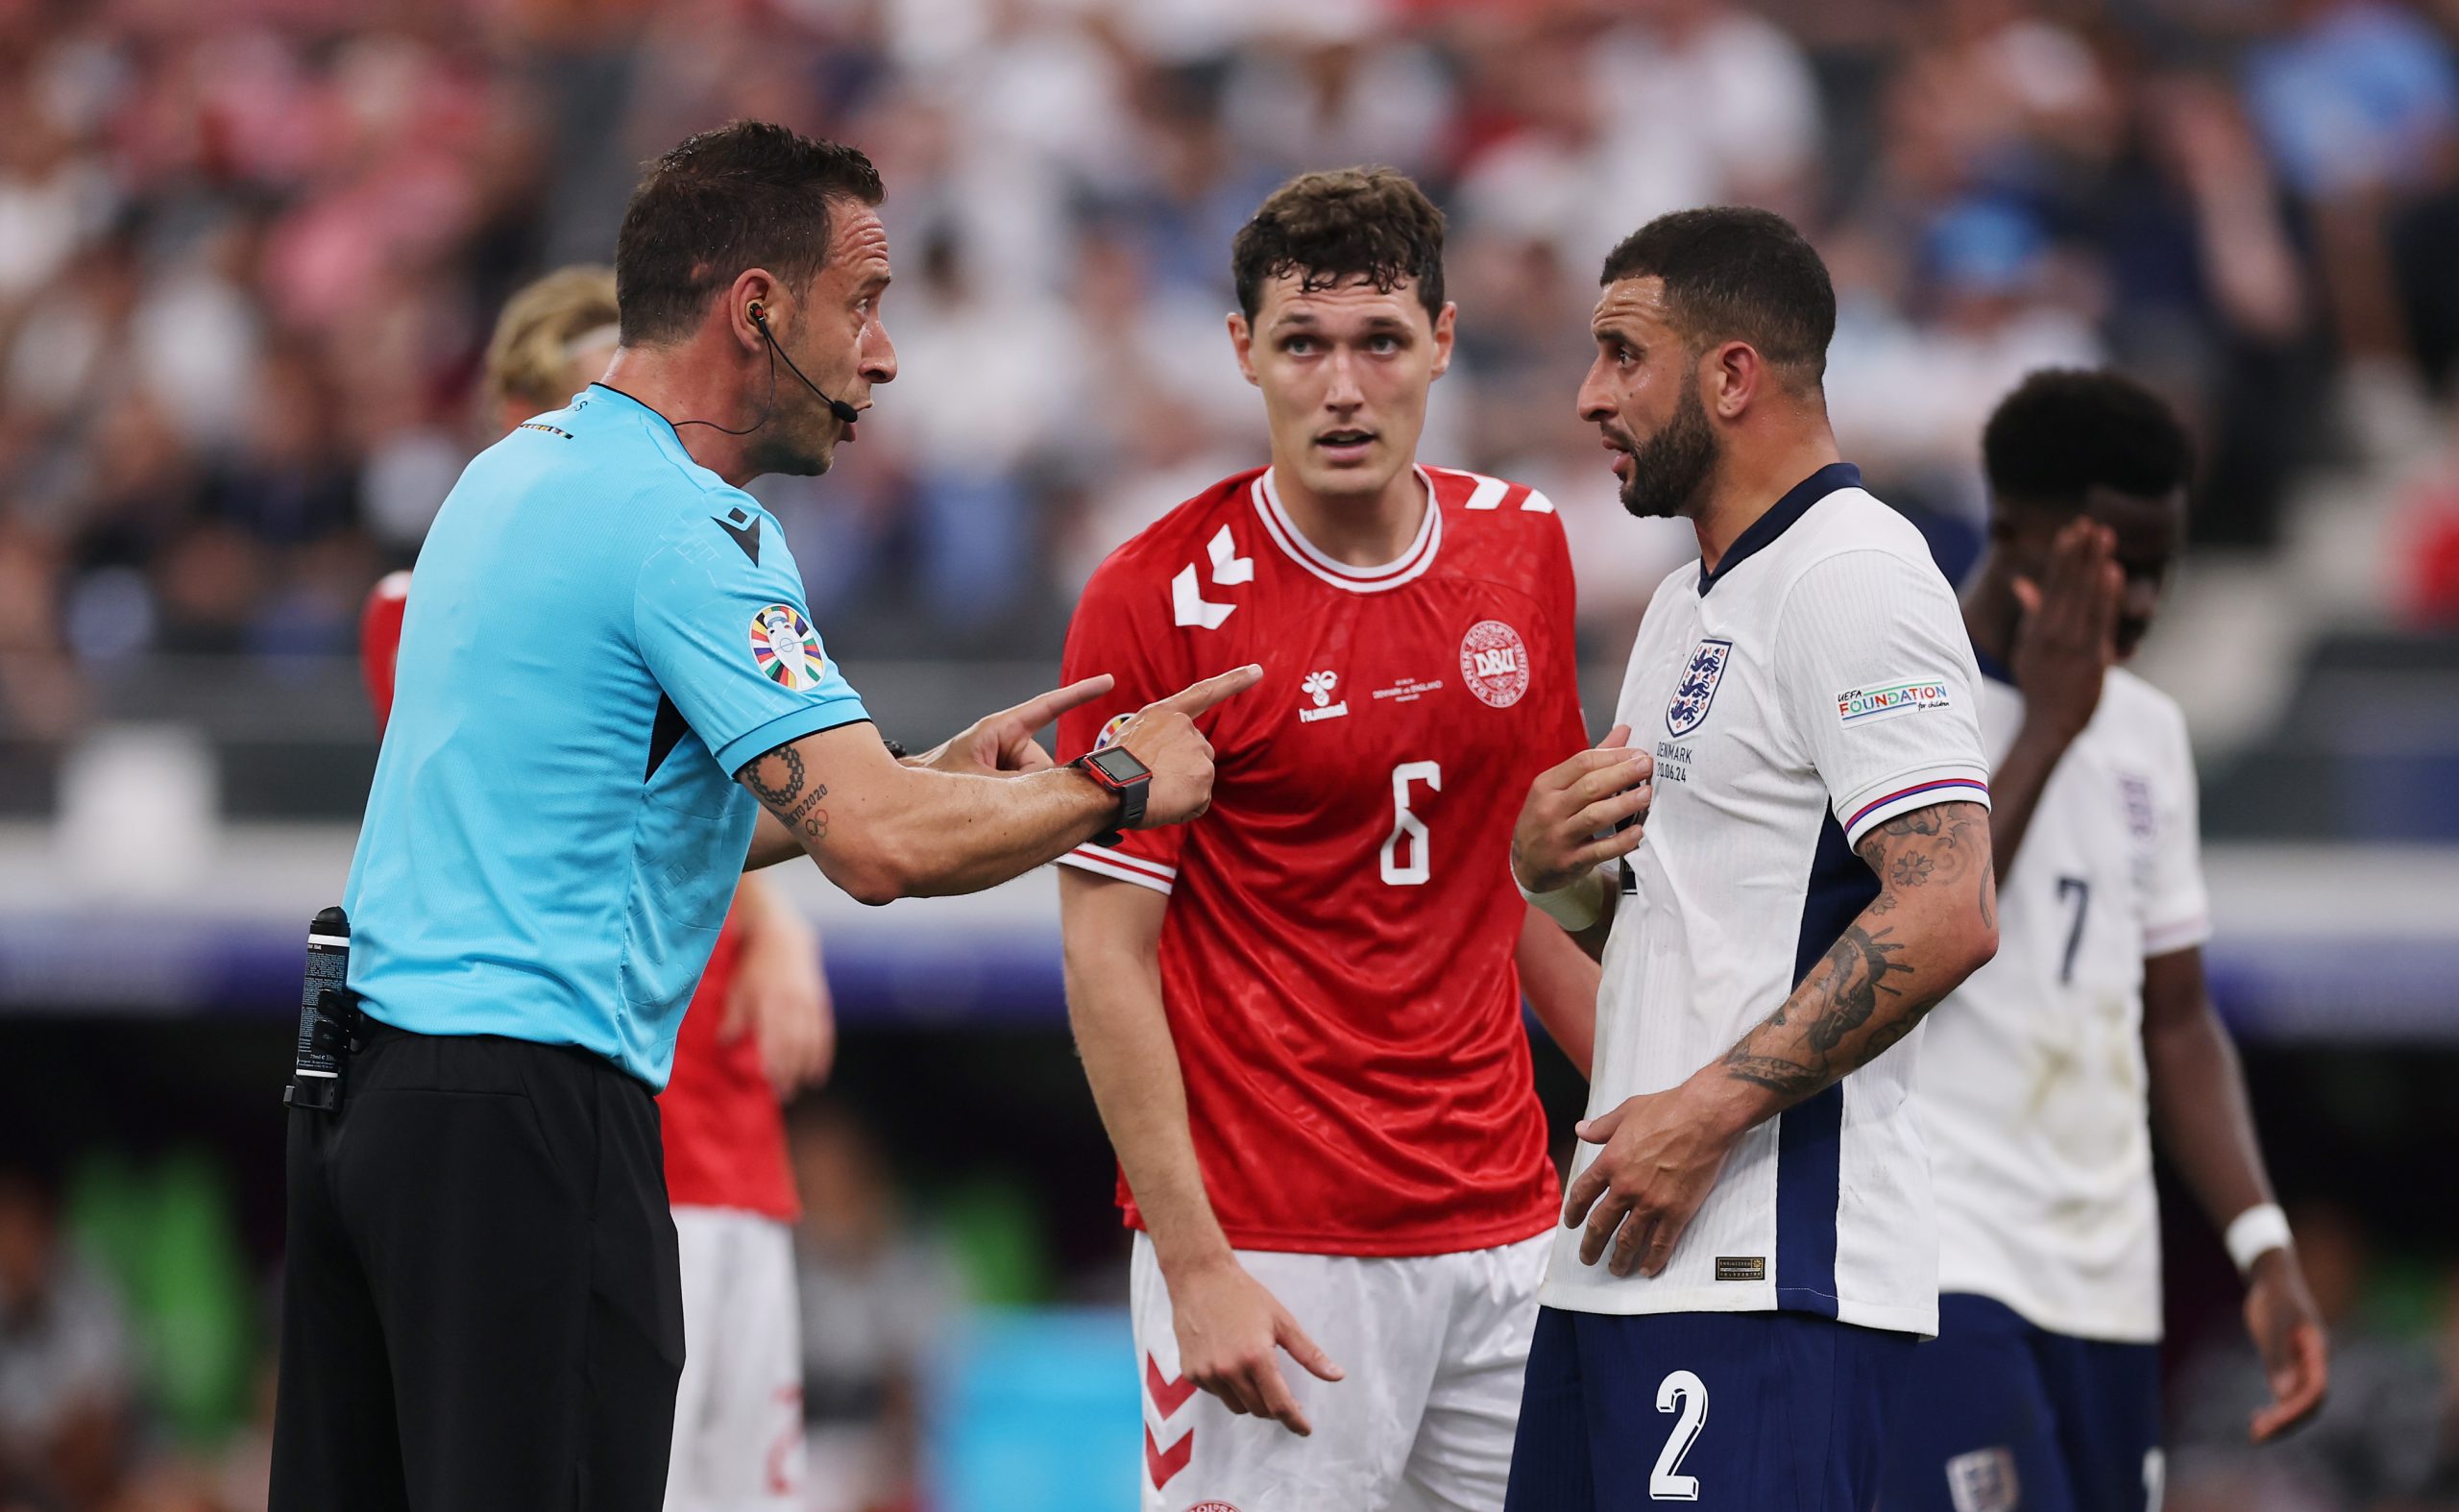 Eagle-eyed fans say ‘game is well and truly gone’ after spotting referee for England clash has Euros TATTOO